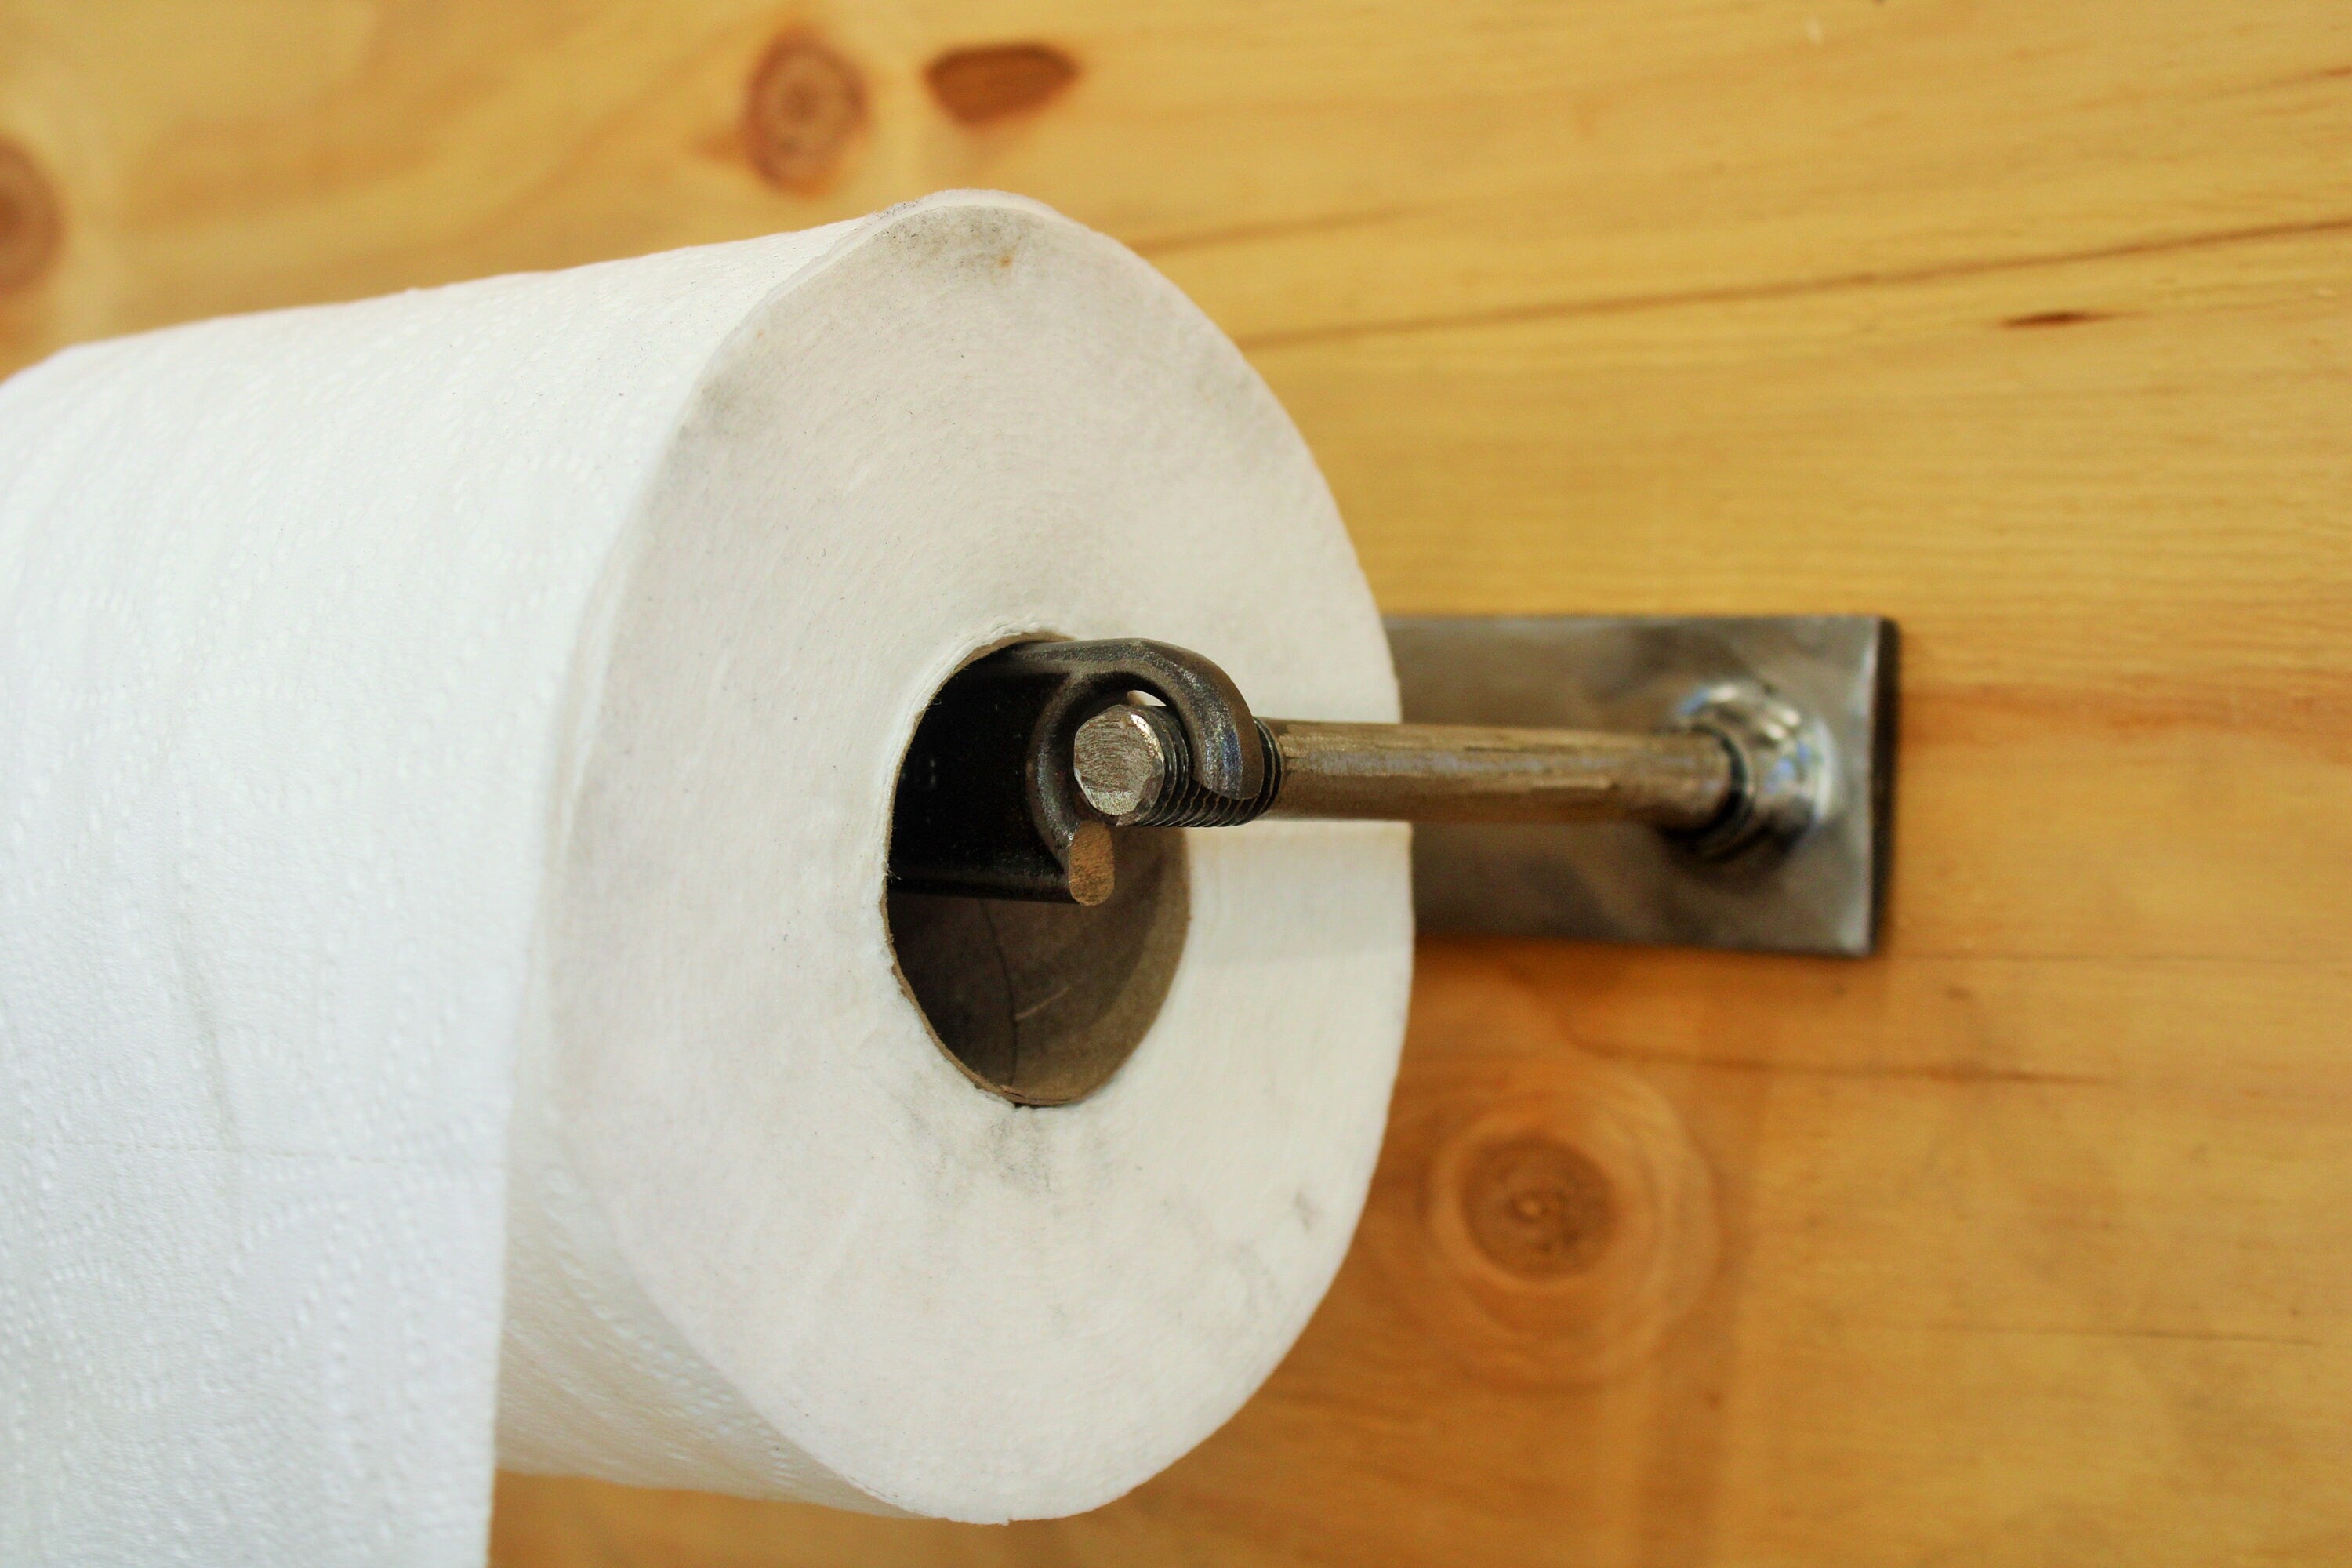 Close-up view of the wrench and nut toilet paper holder with a roll of toilet paper on it.